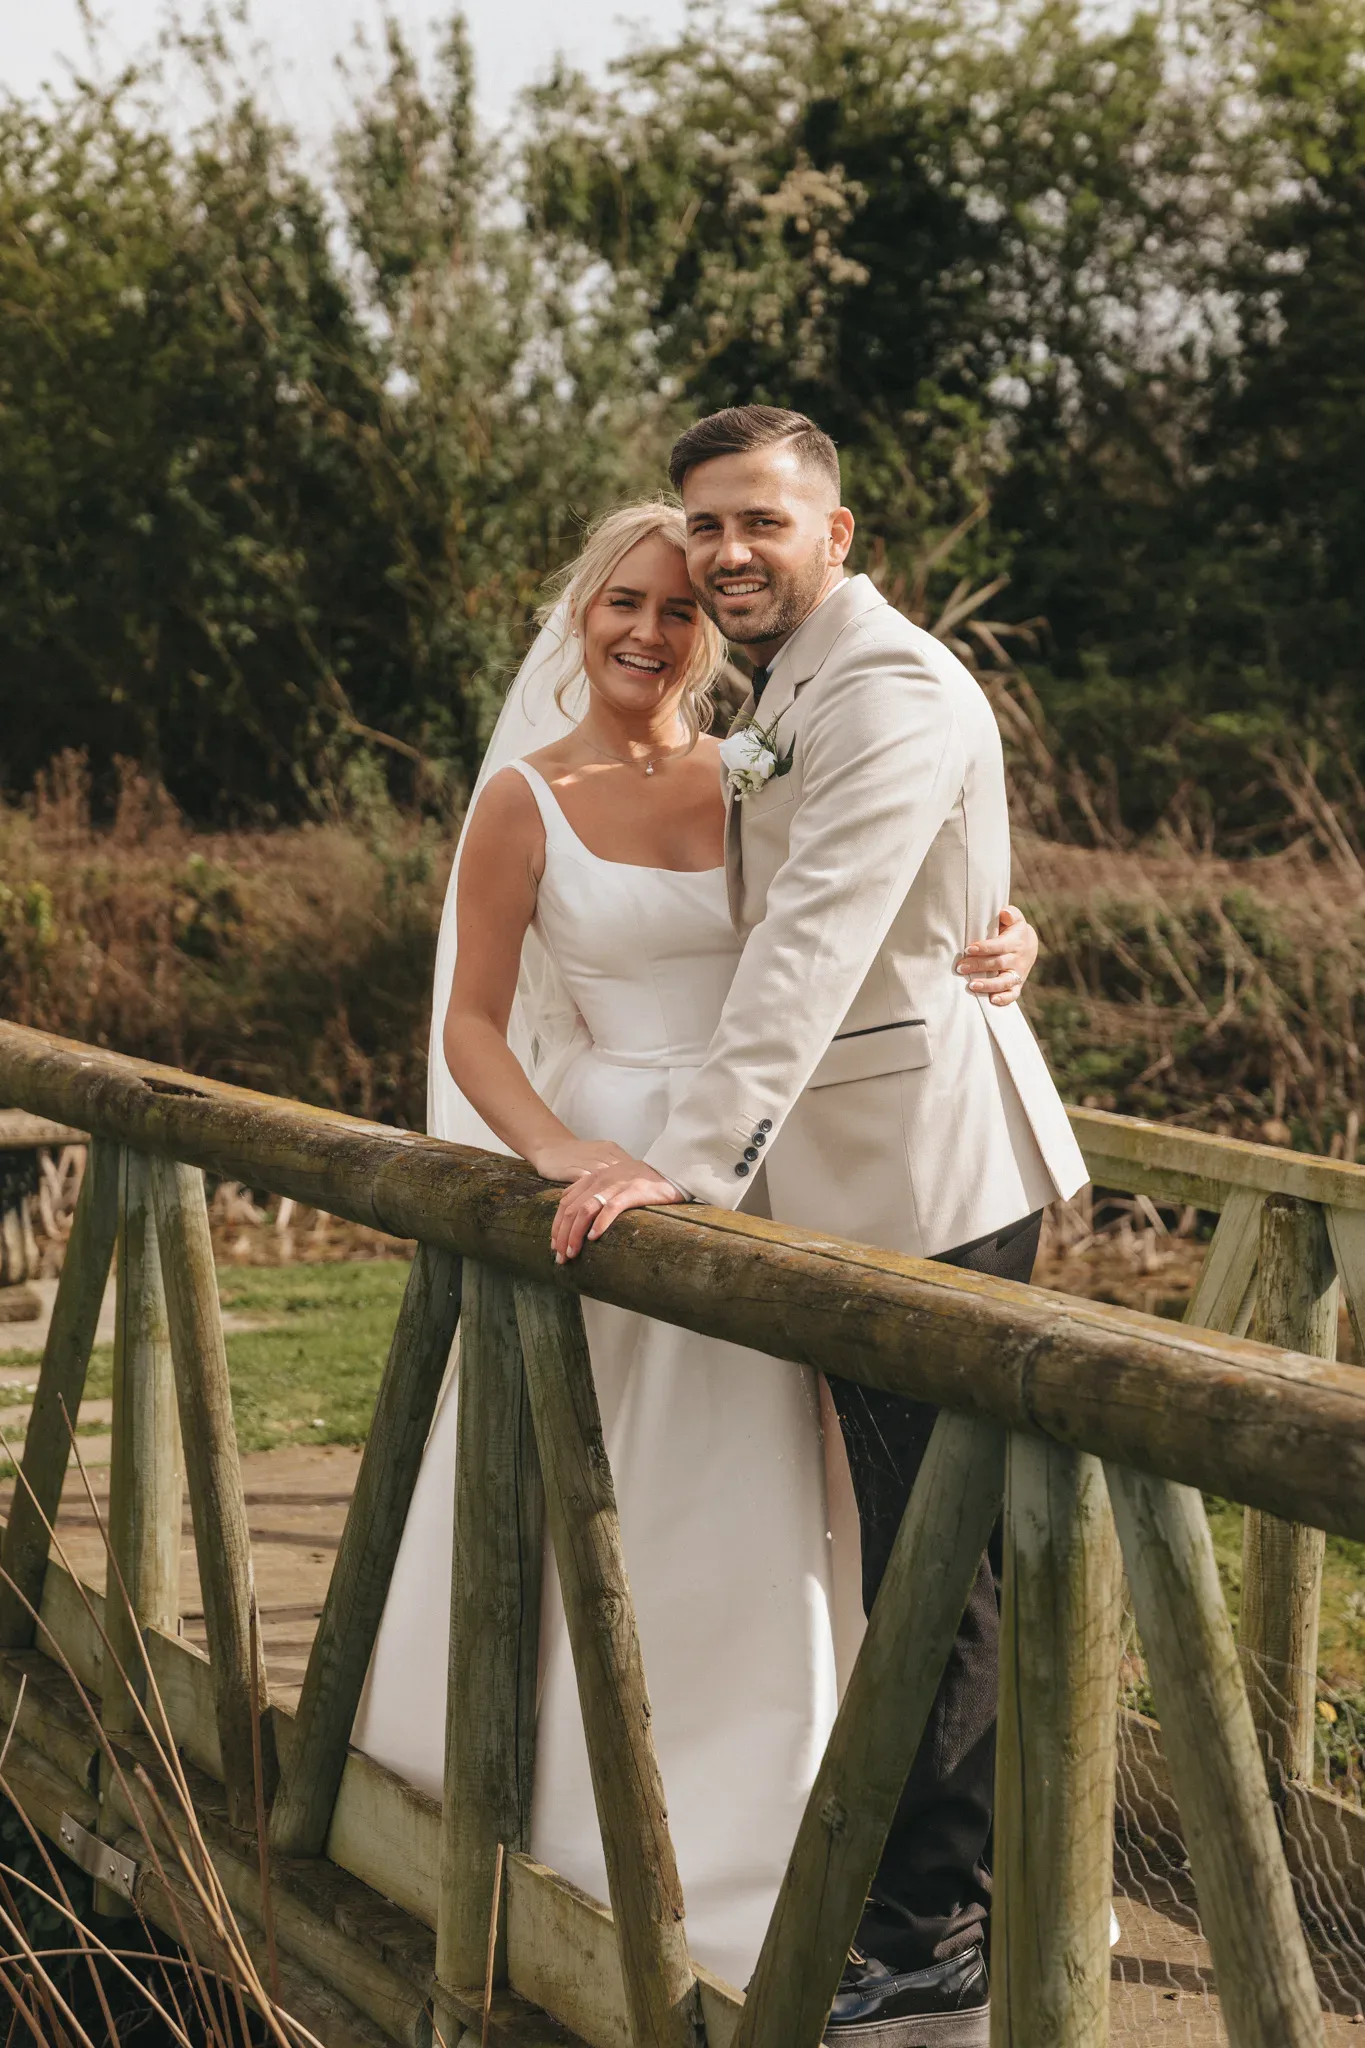 A joyful bride and groom embracing on a wooden bridge in a natural setting, smiling broadly. the bride is in a classic white gown and the groom is in a stylish cream suit.